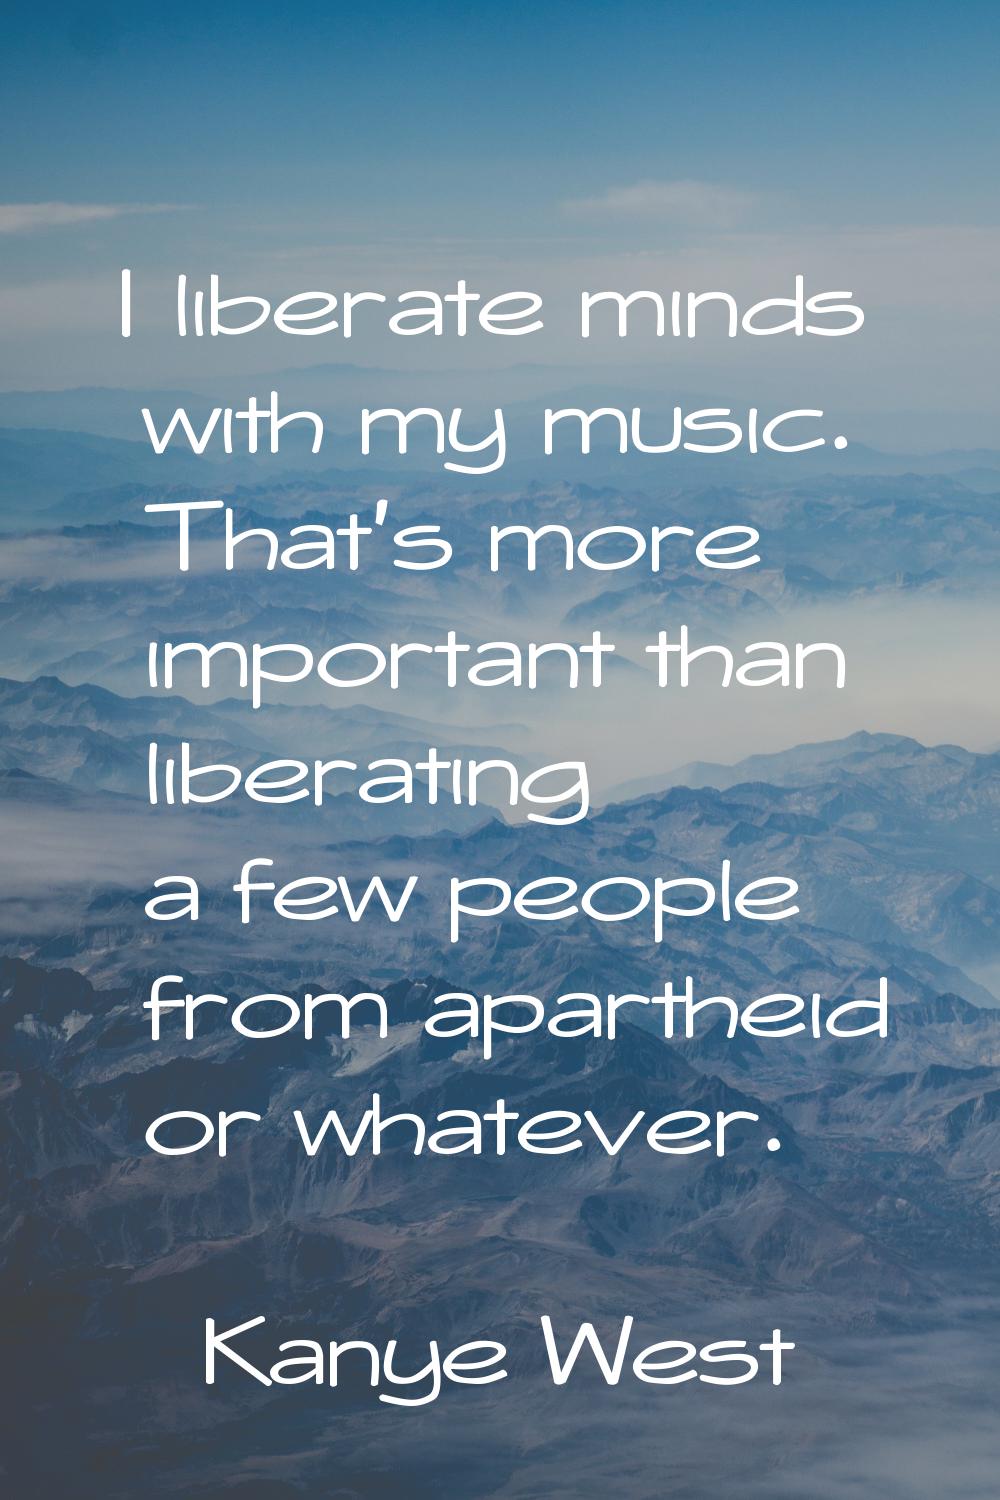 I liberate minds with my music. That's more important than liberating a few people from apartheid o